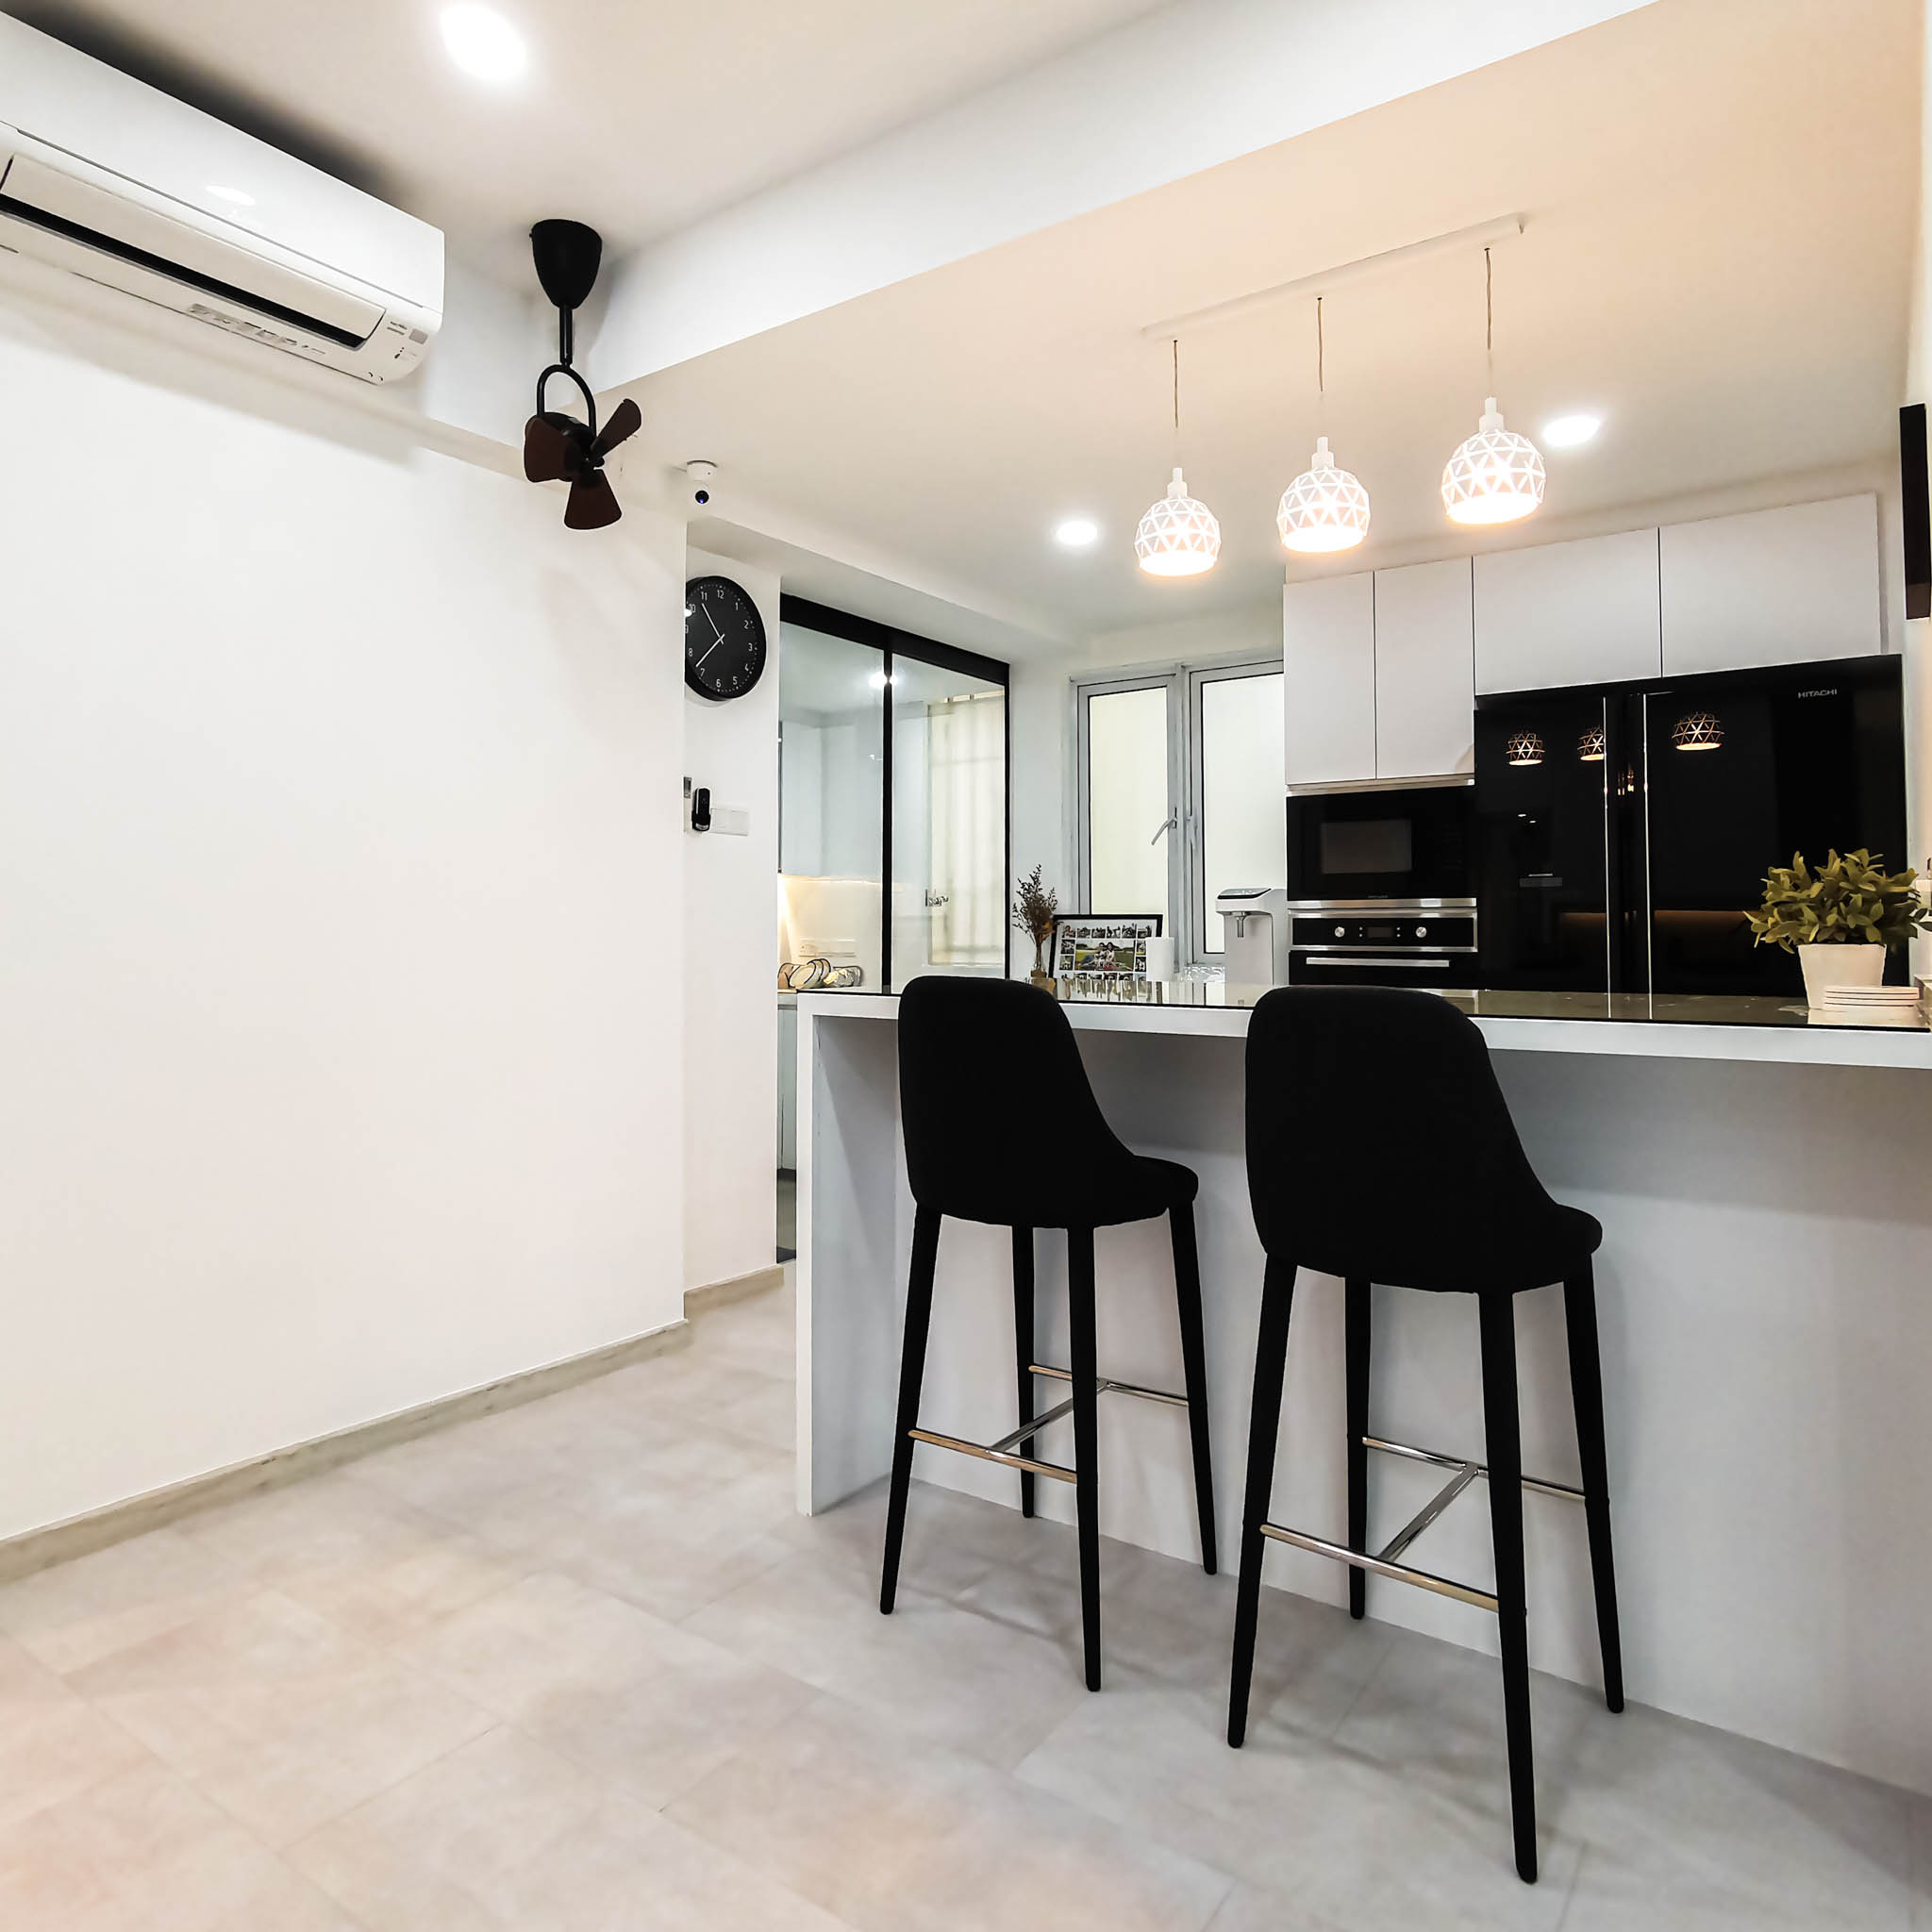 Euphony Gardens 2 - 743sqft by Elysian Design Studio Pte Ltd. Unit is Condo and follows a  style.